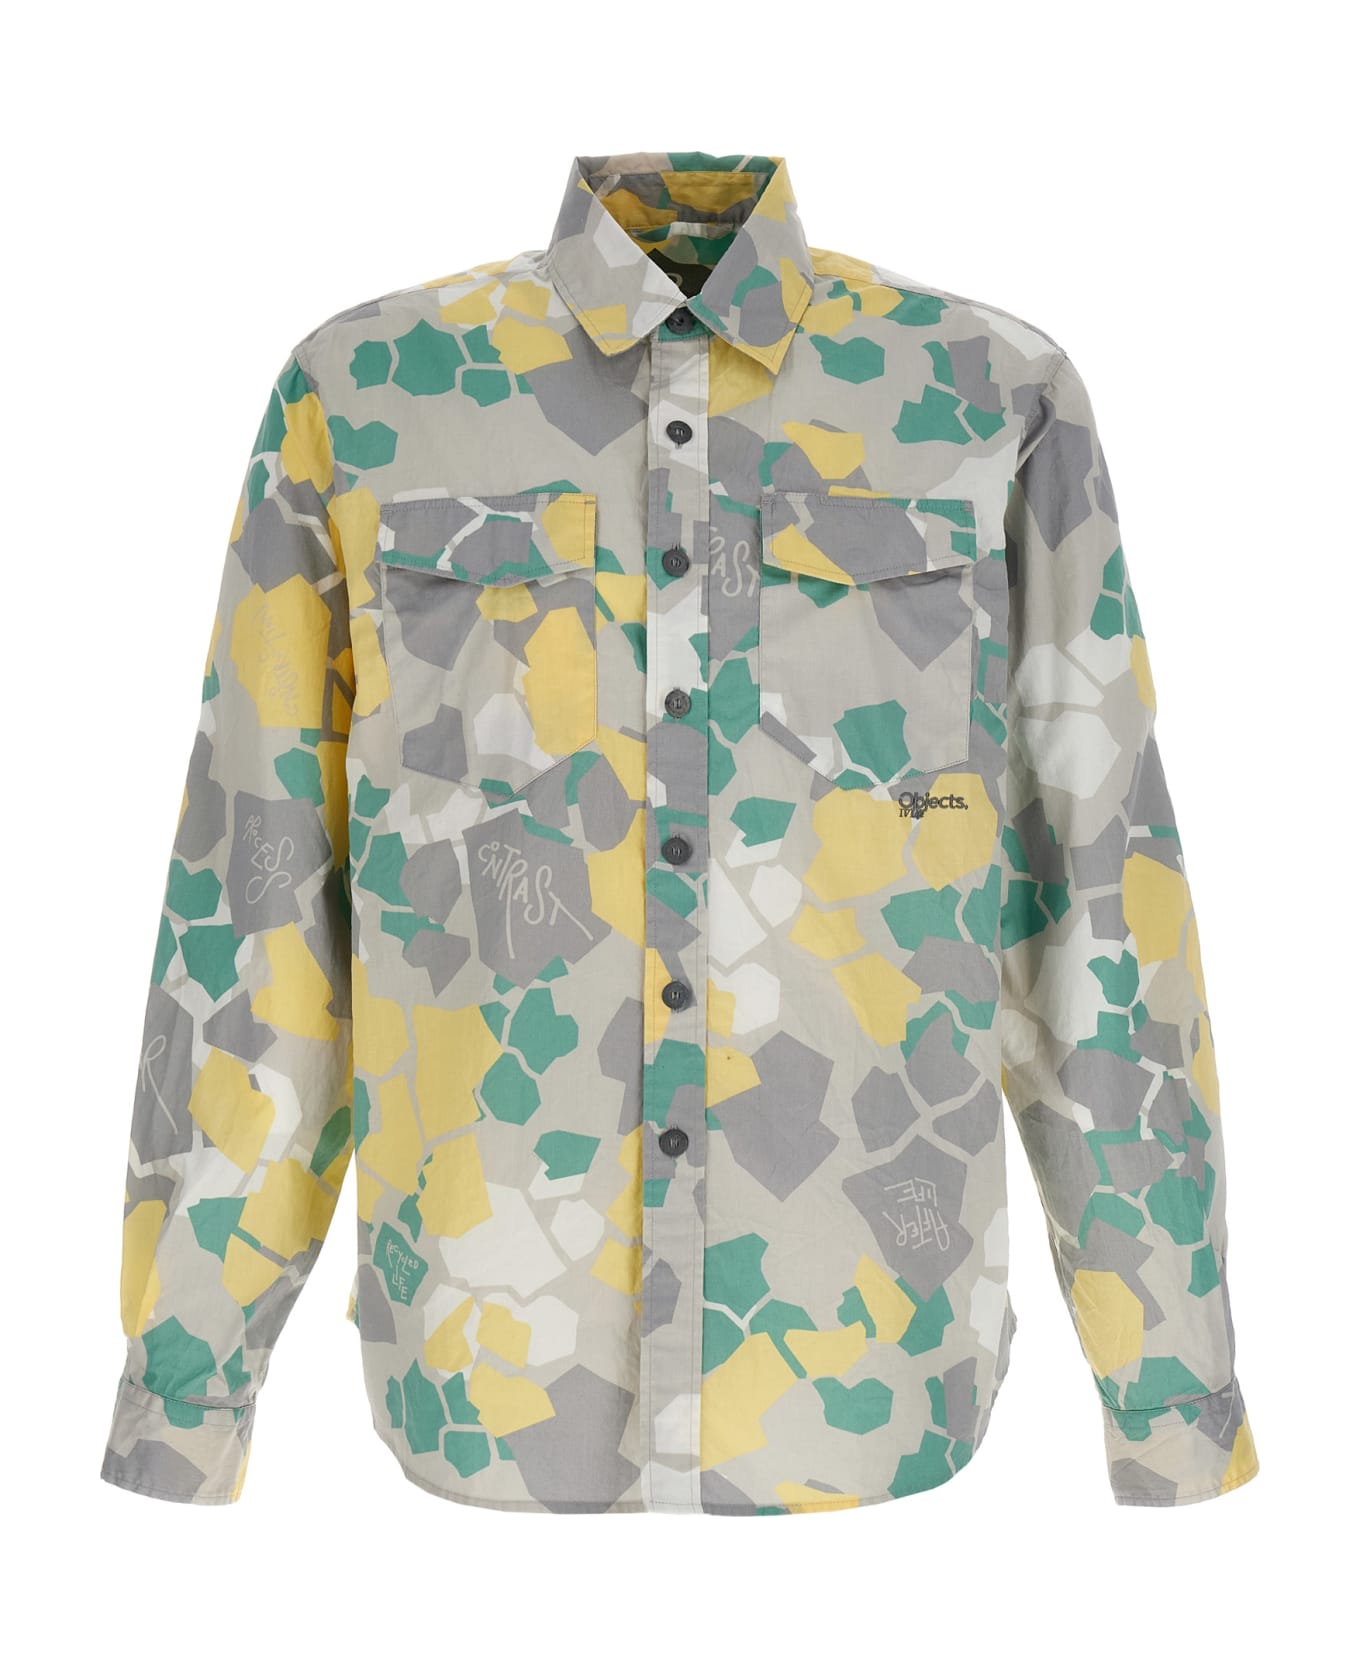 Objects Iv Life 'workwear' Shirt - Multicolor